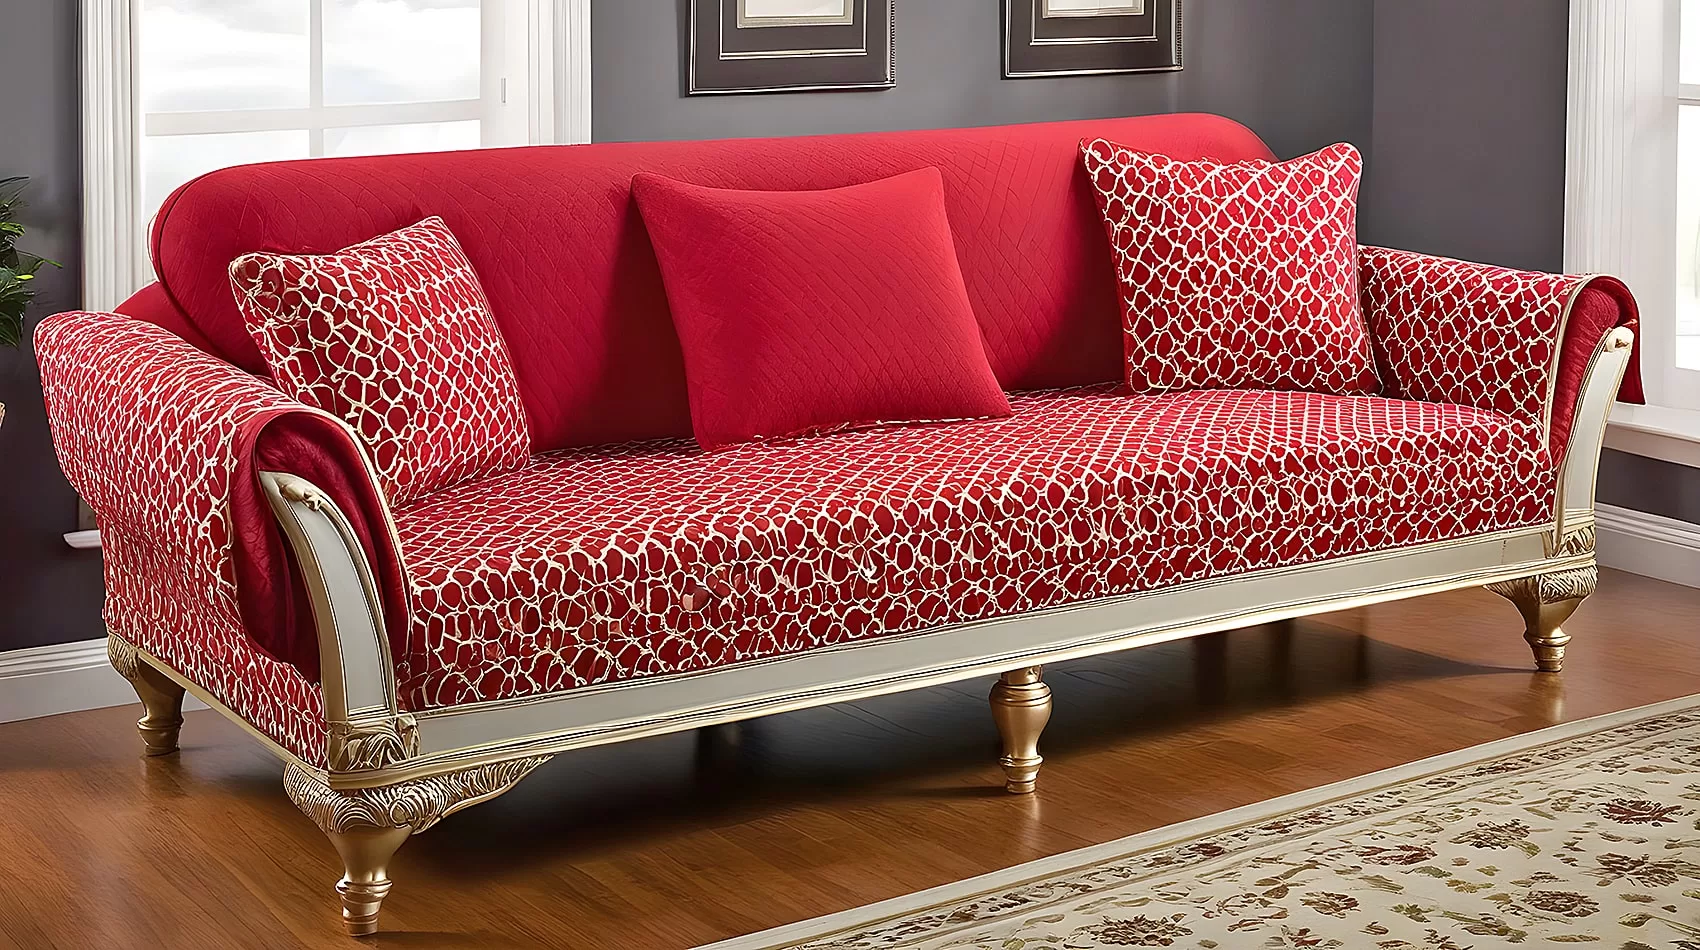 Red Couch Covers | Red Sofa Covers